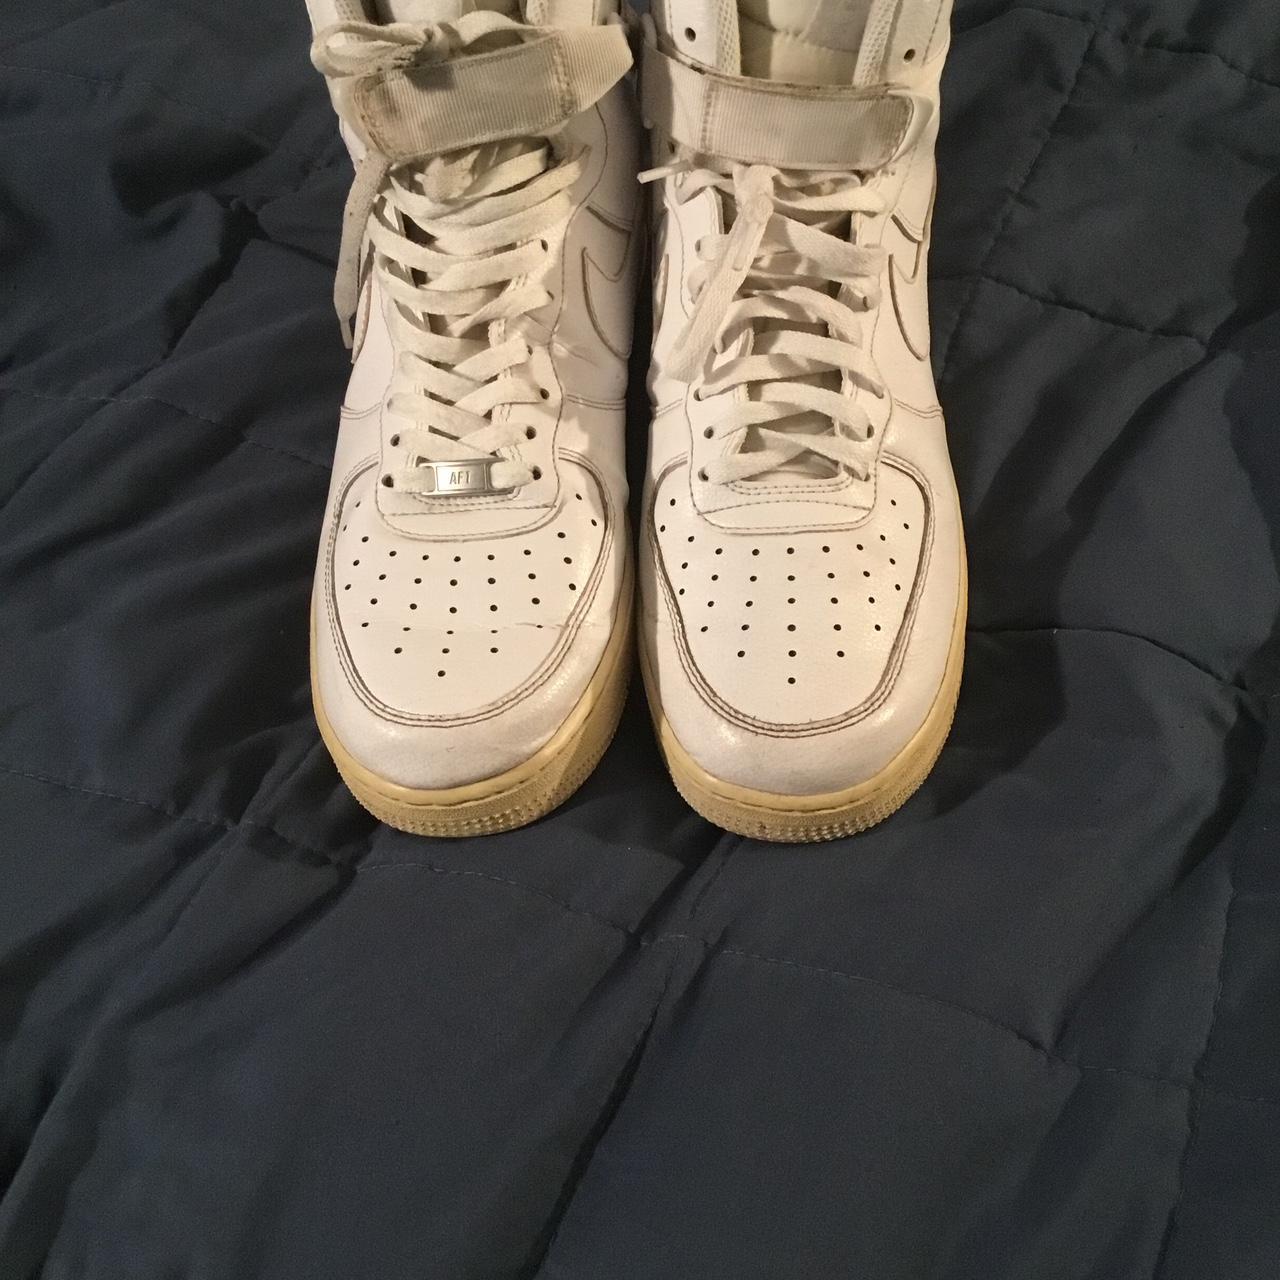 Nike high top Air Force 1, good condition size 11.5 - Depop